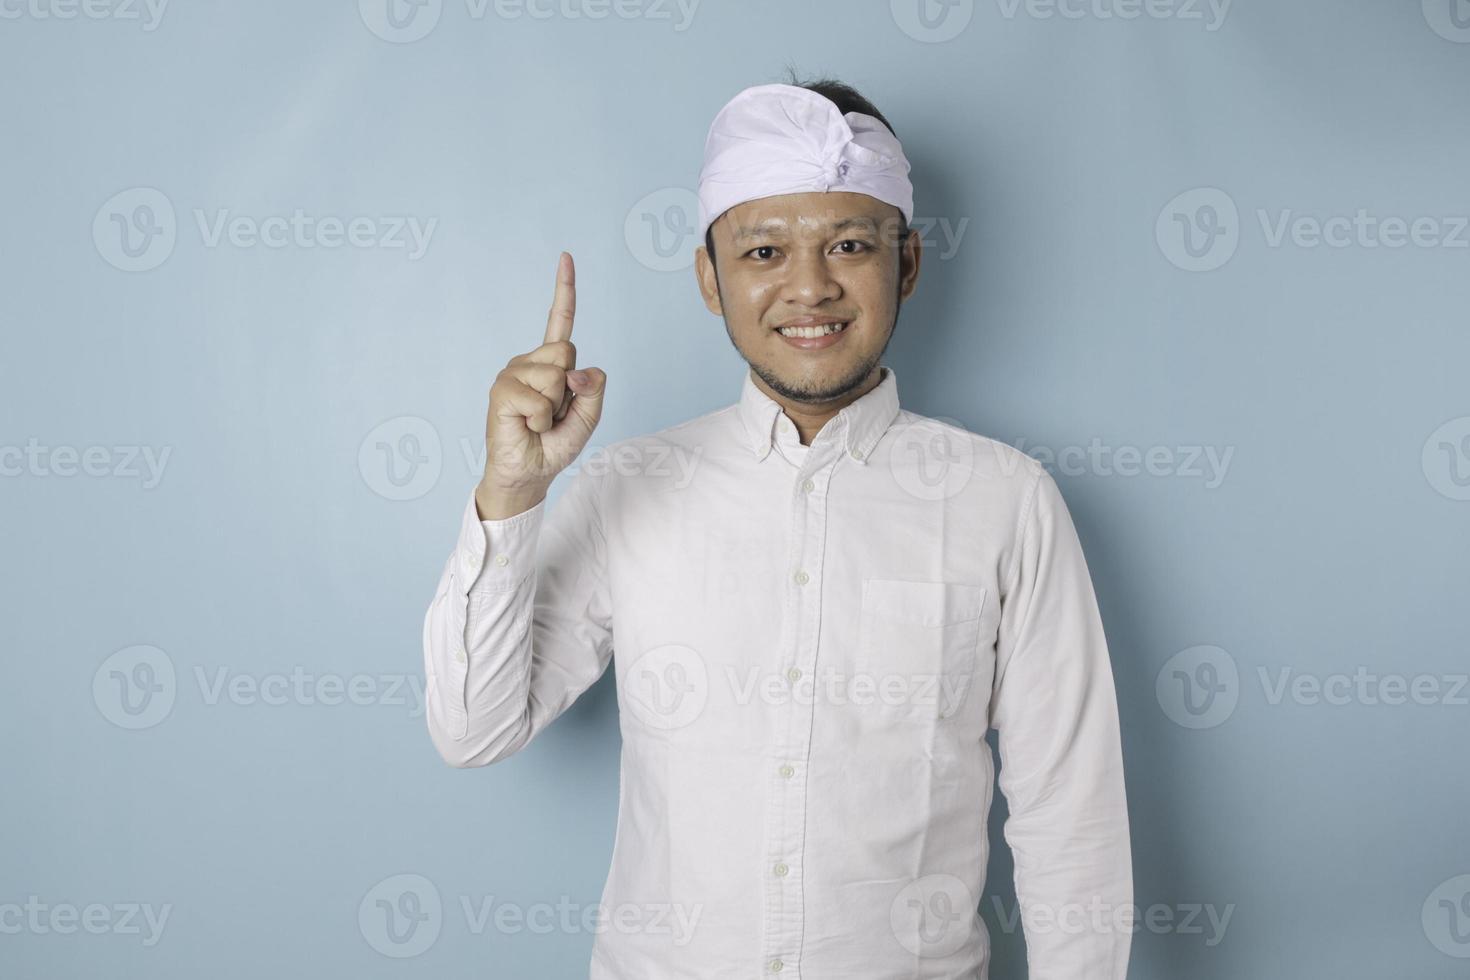 Excited Balinese man wearing udeng or traditional headband and white shirt giving number 12345 by hand gesture photo